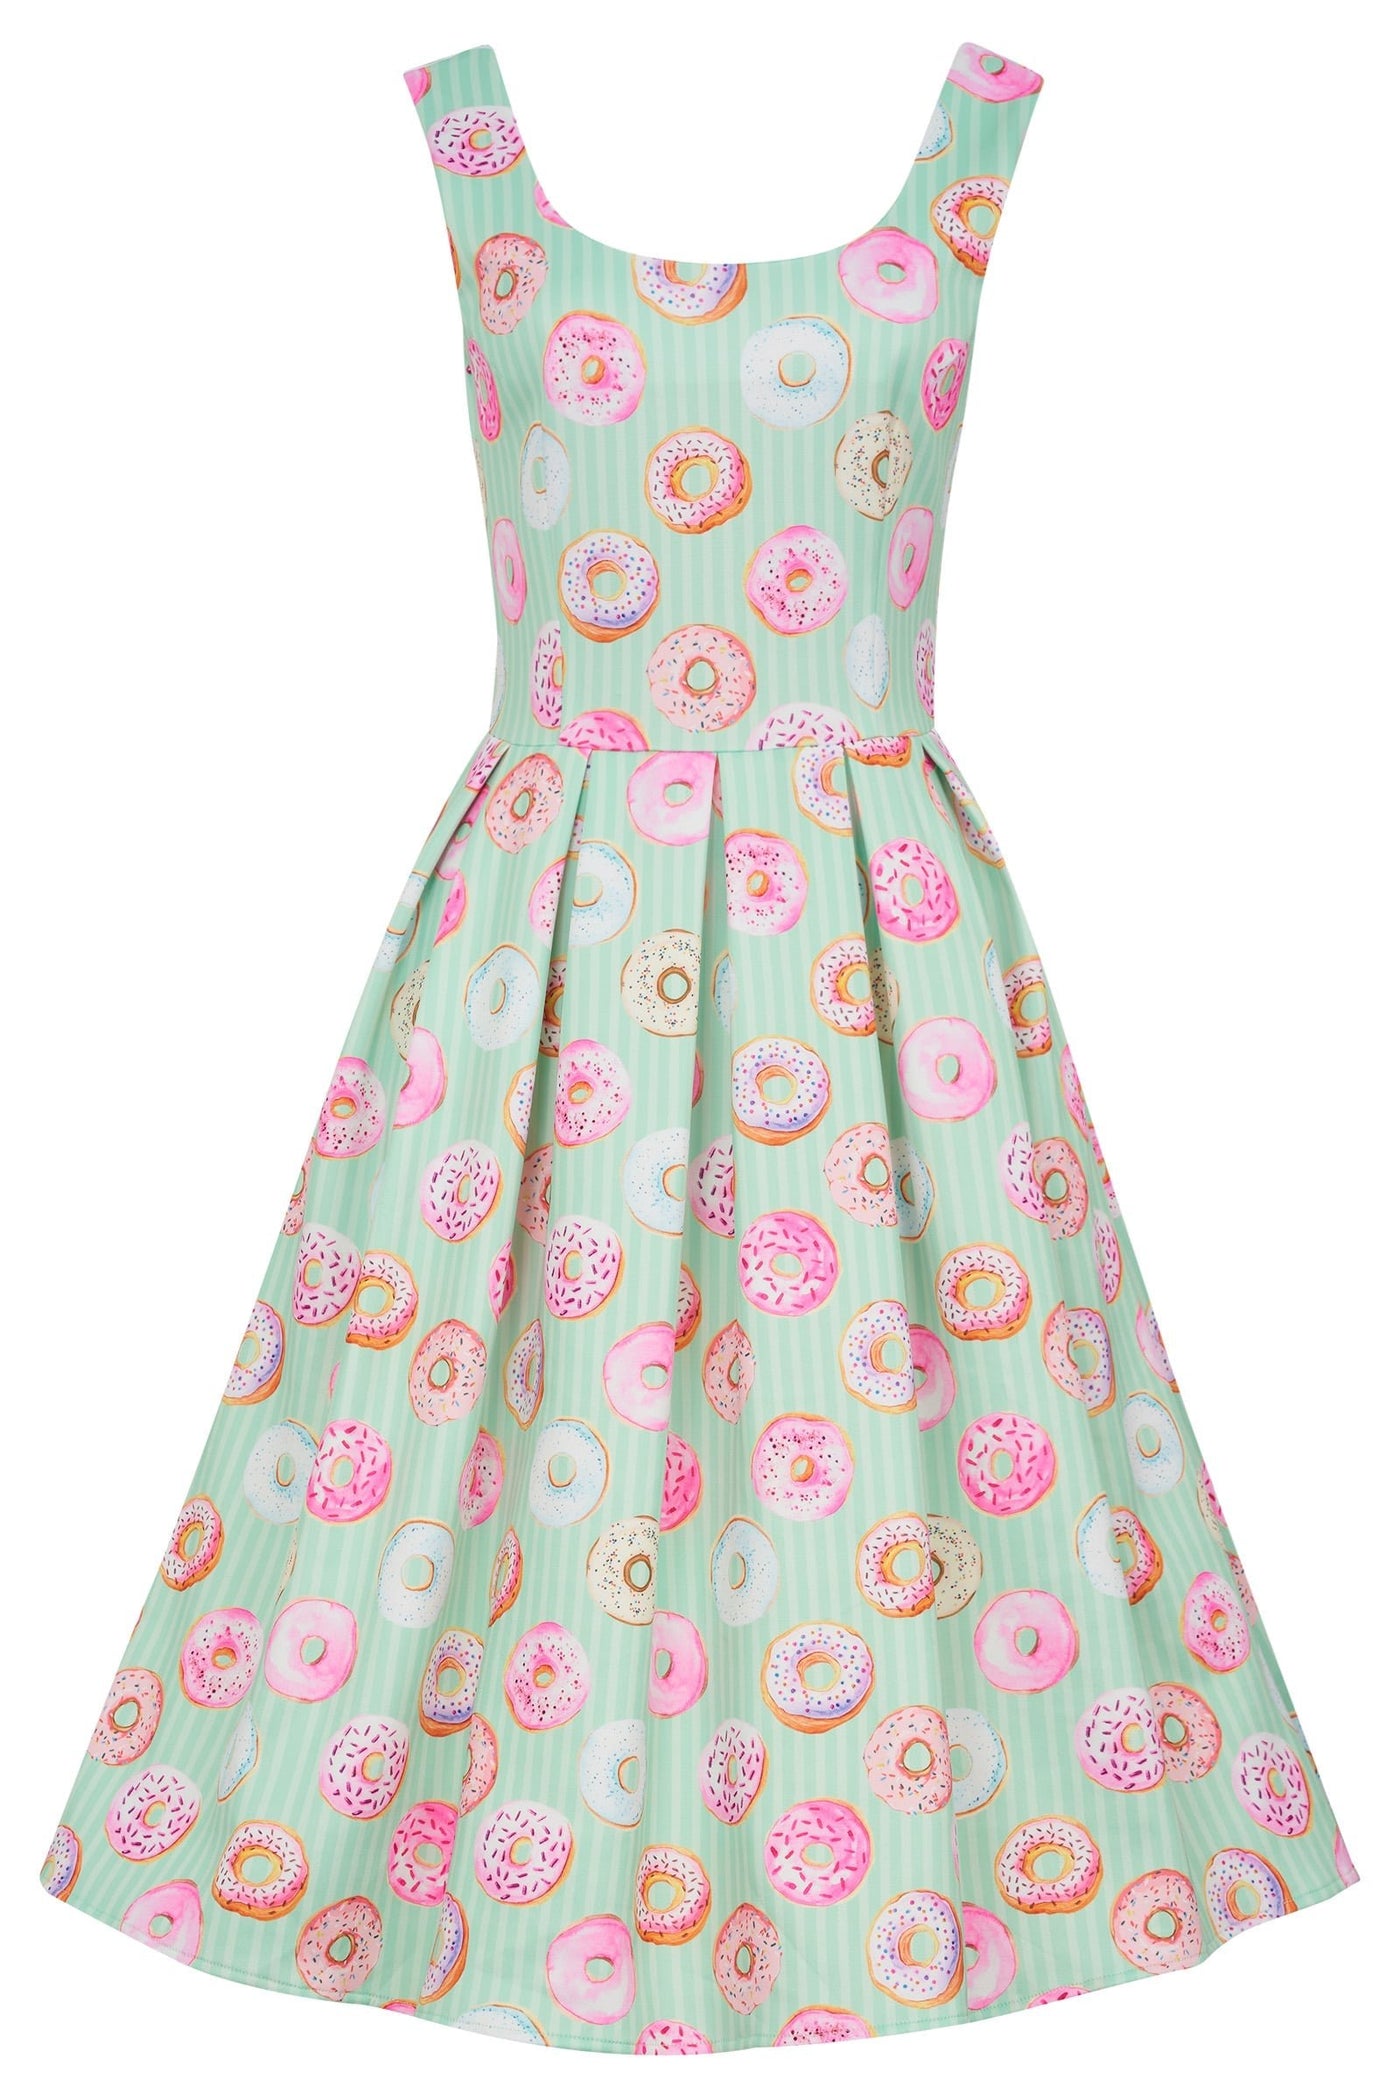 Front view of our sleeveless Amanda dress in striped mint green and donut print